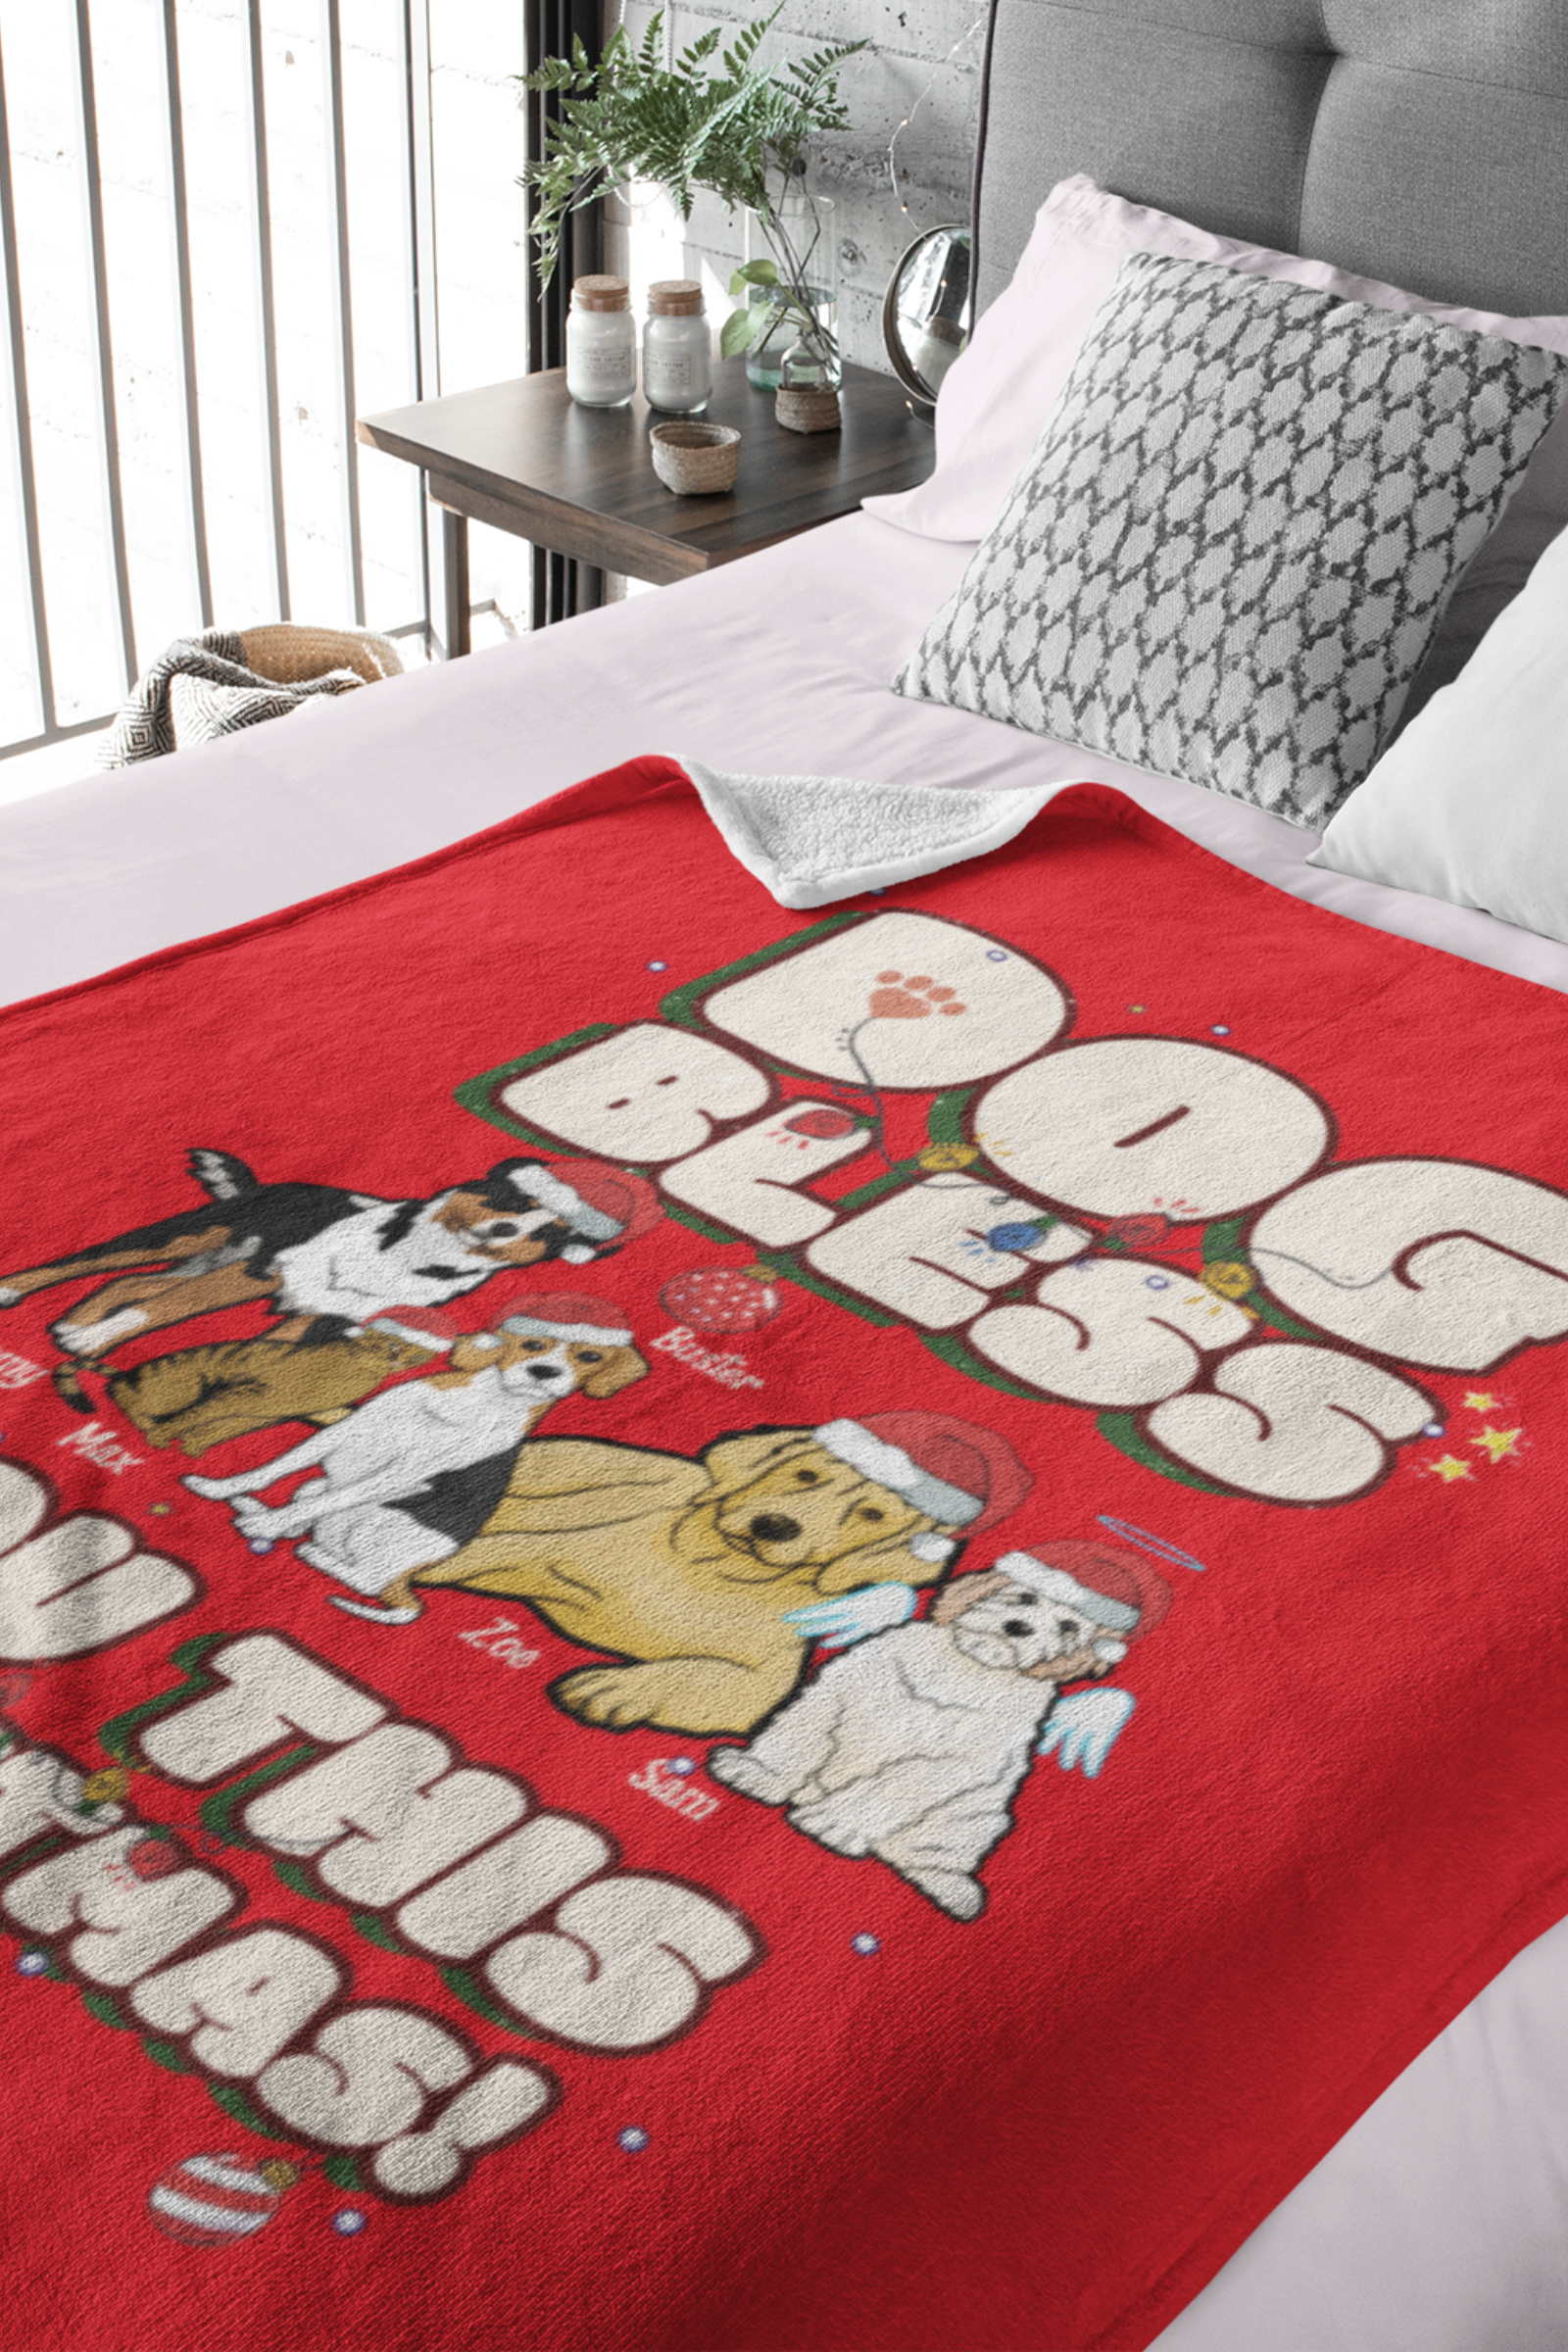 Dog Bless You This Christmas Personalized Blanket for Pet Lovers